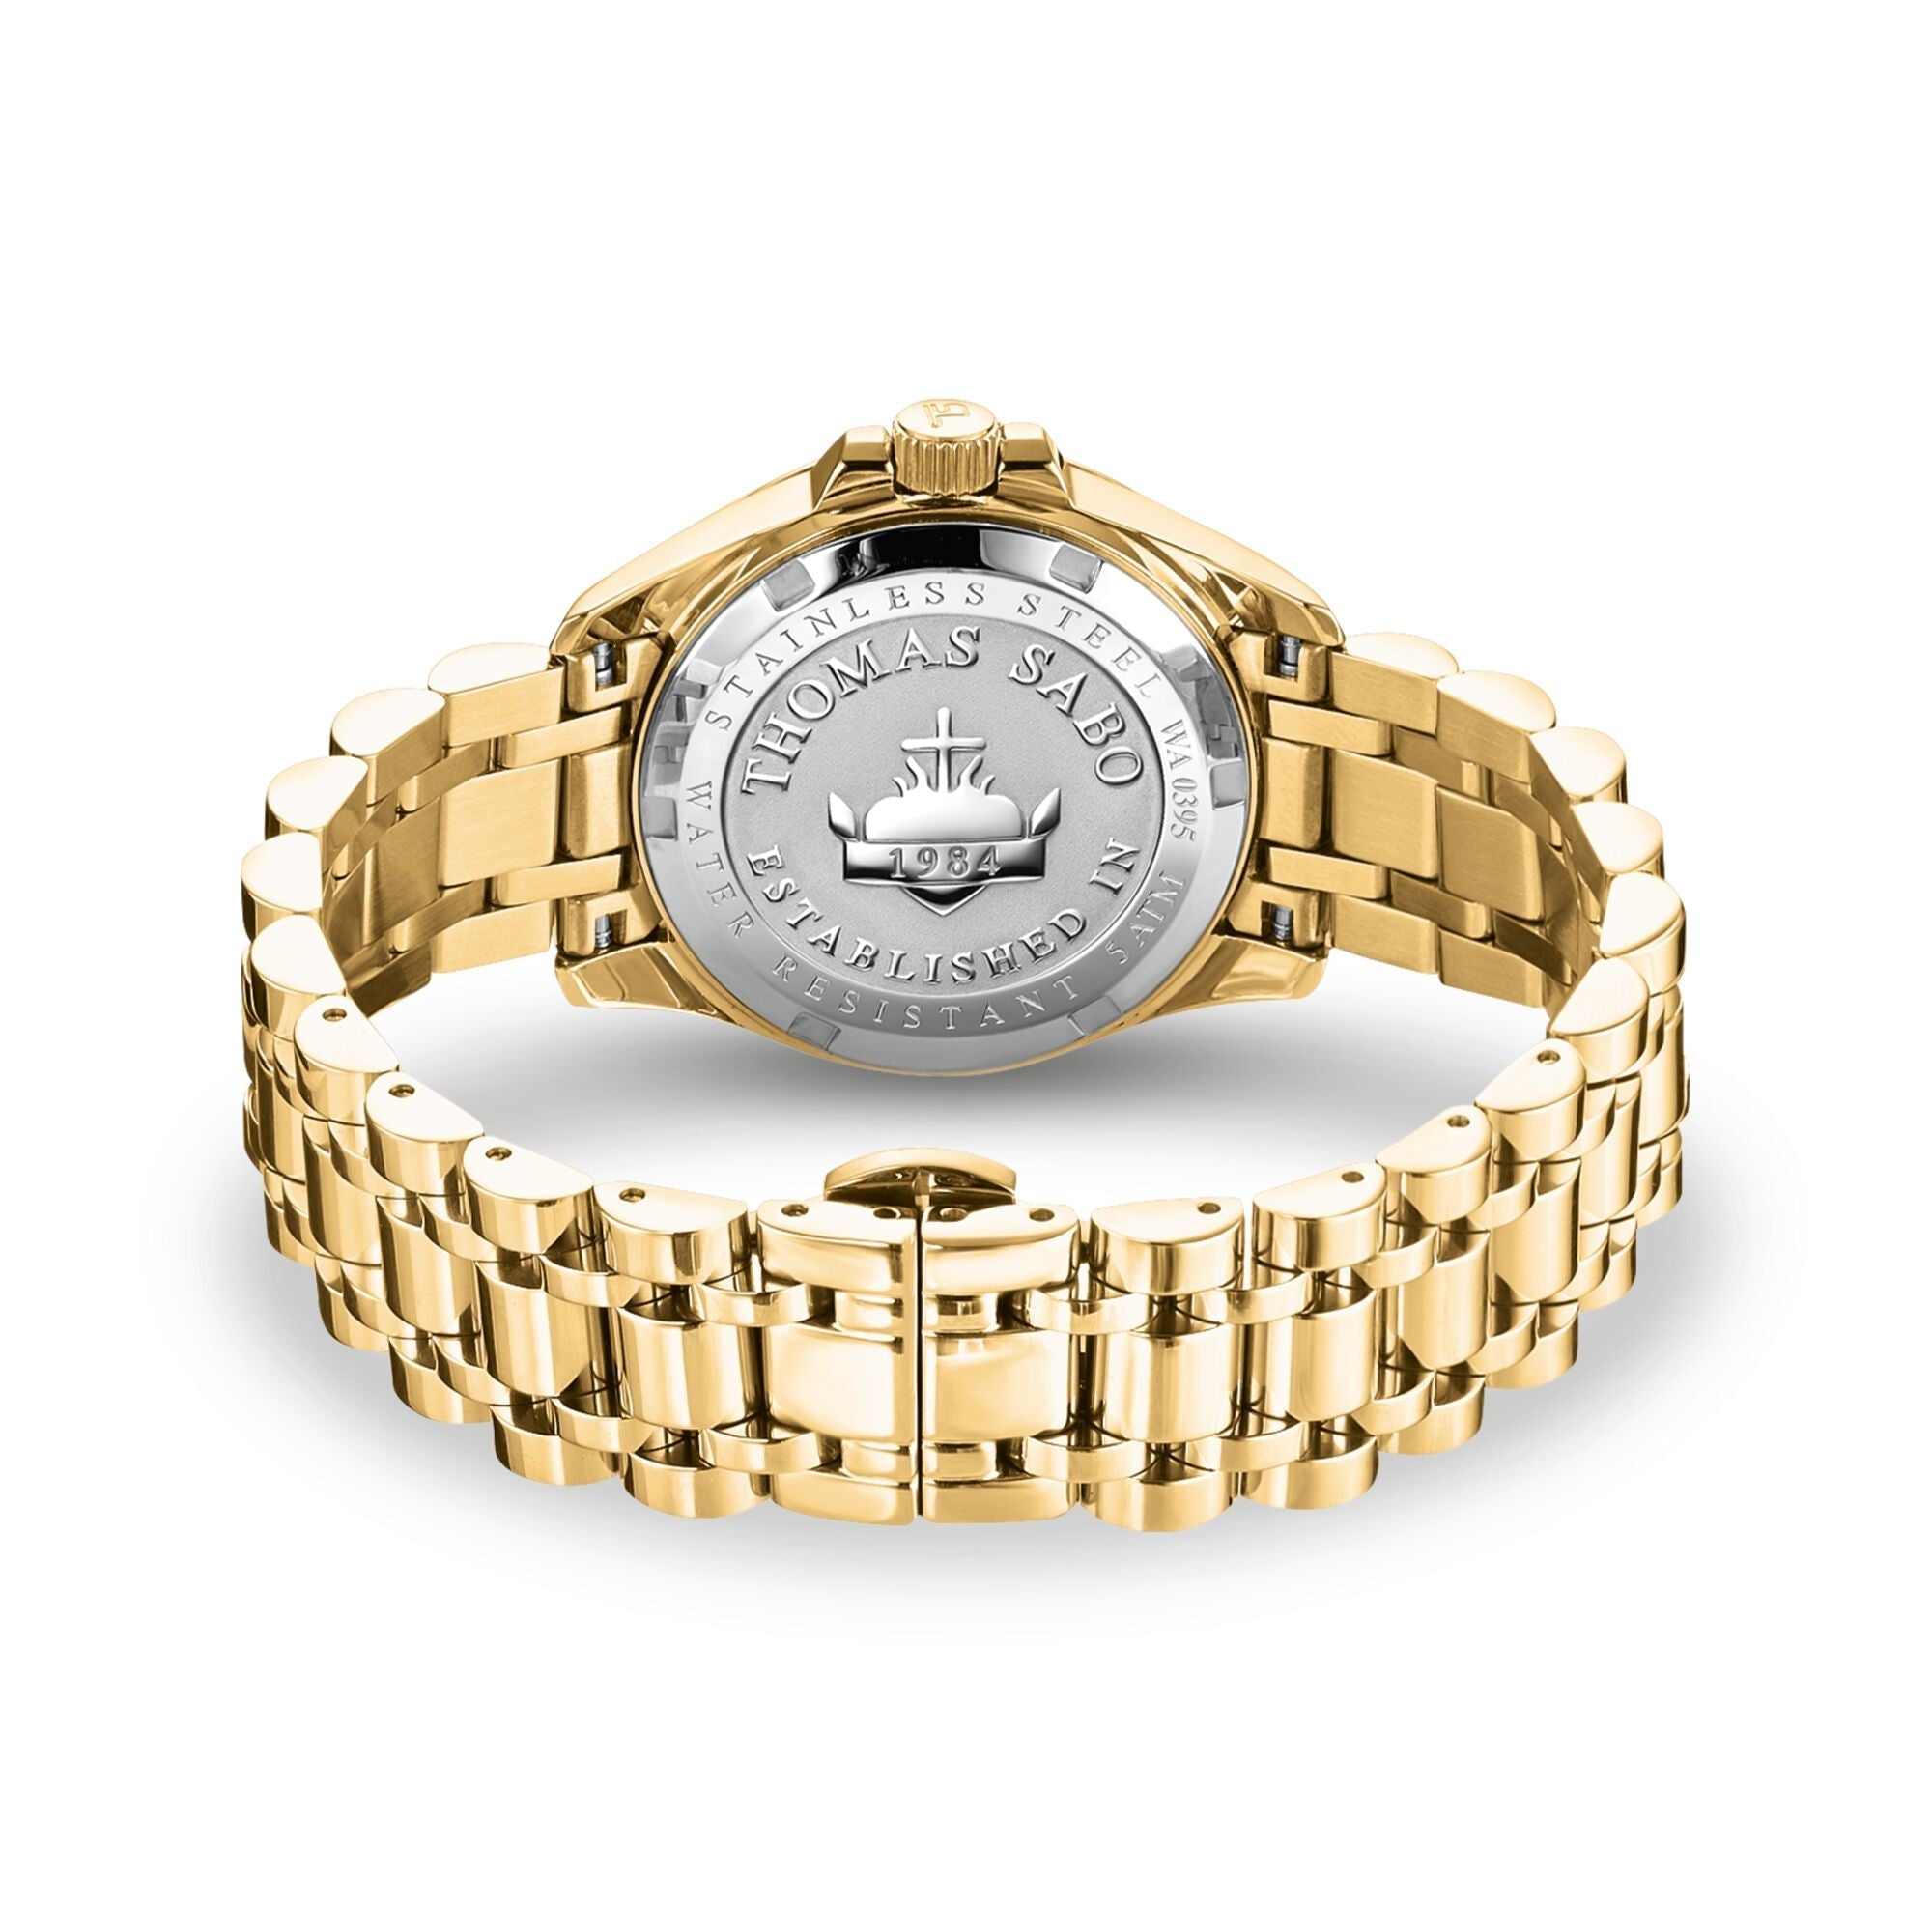 THOMAS SABO Watch for Women Divine Rainbow Yellow Gold-Coloured